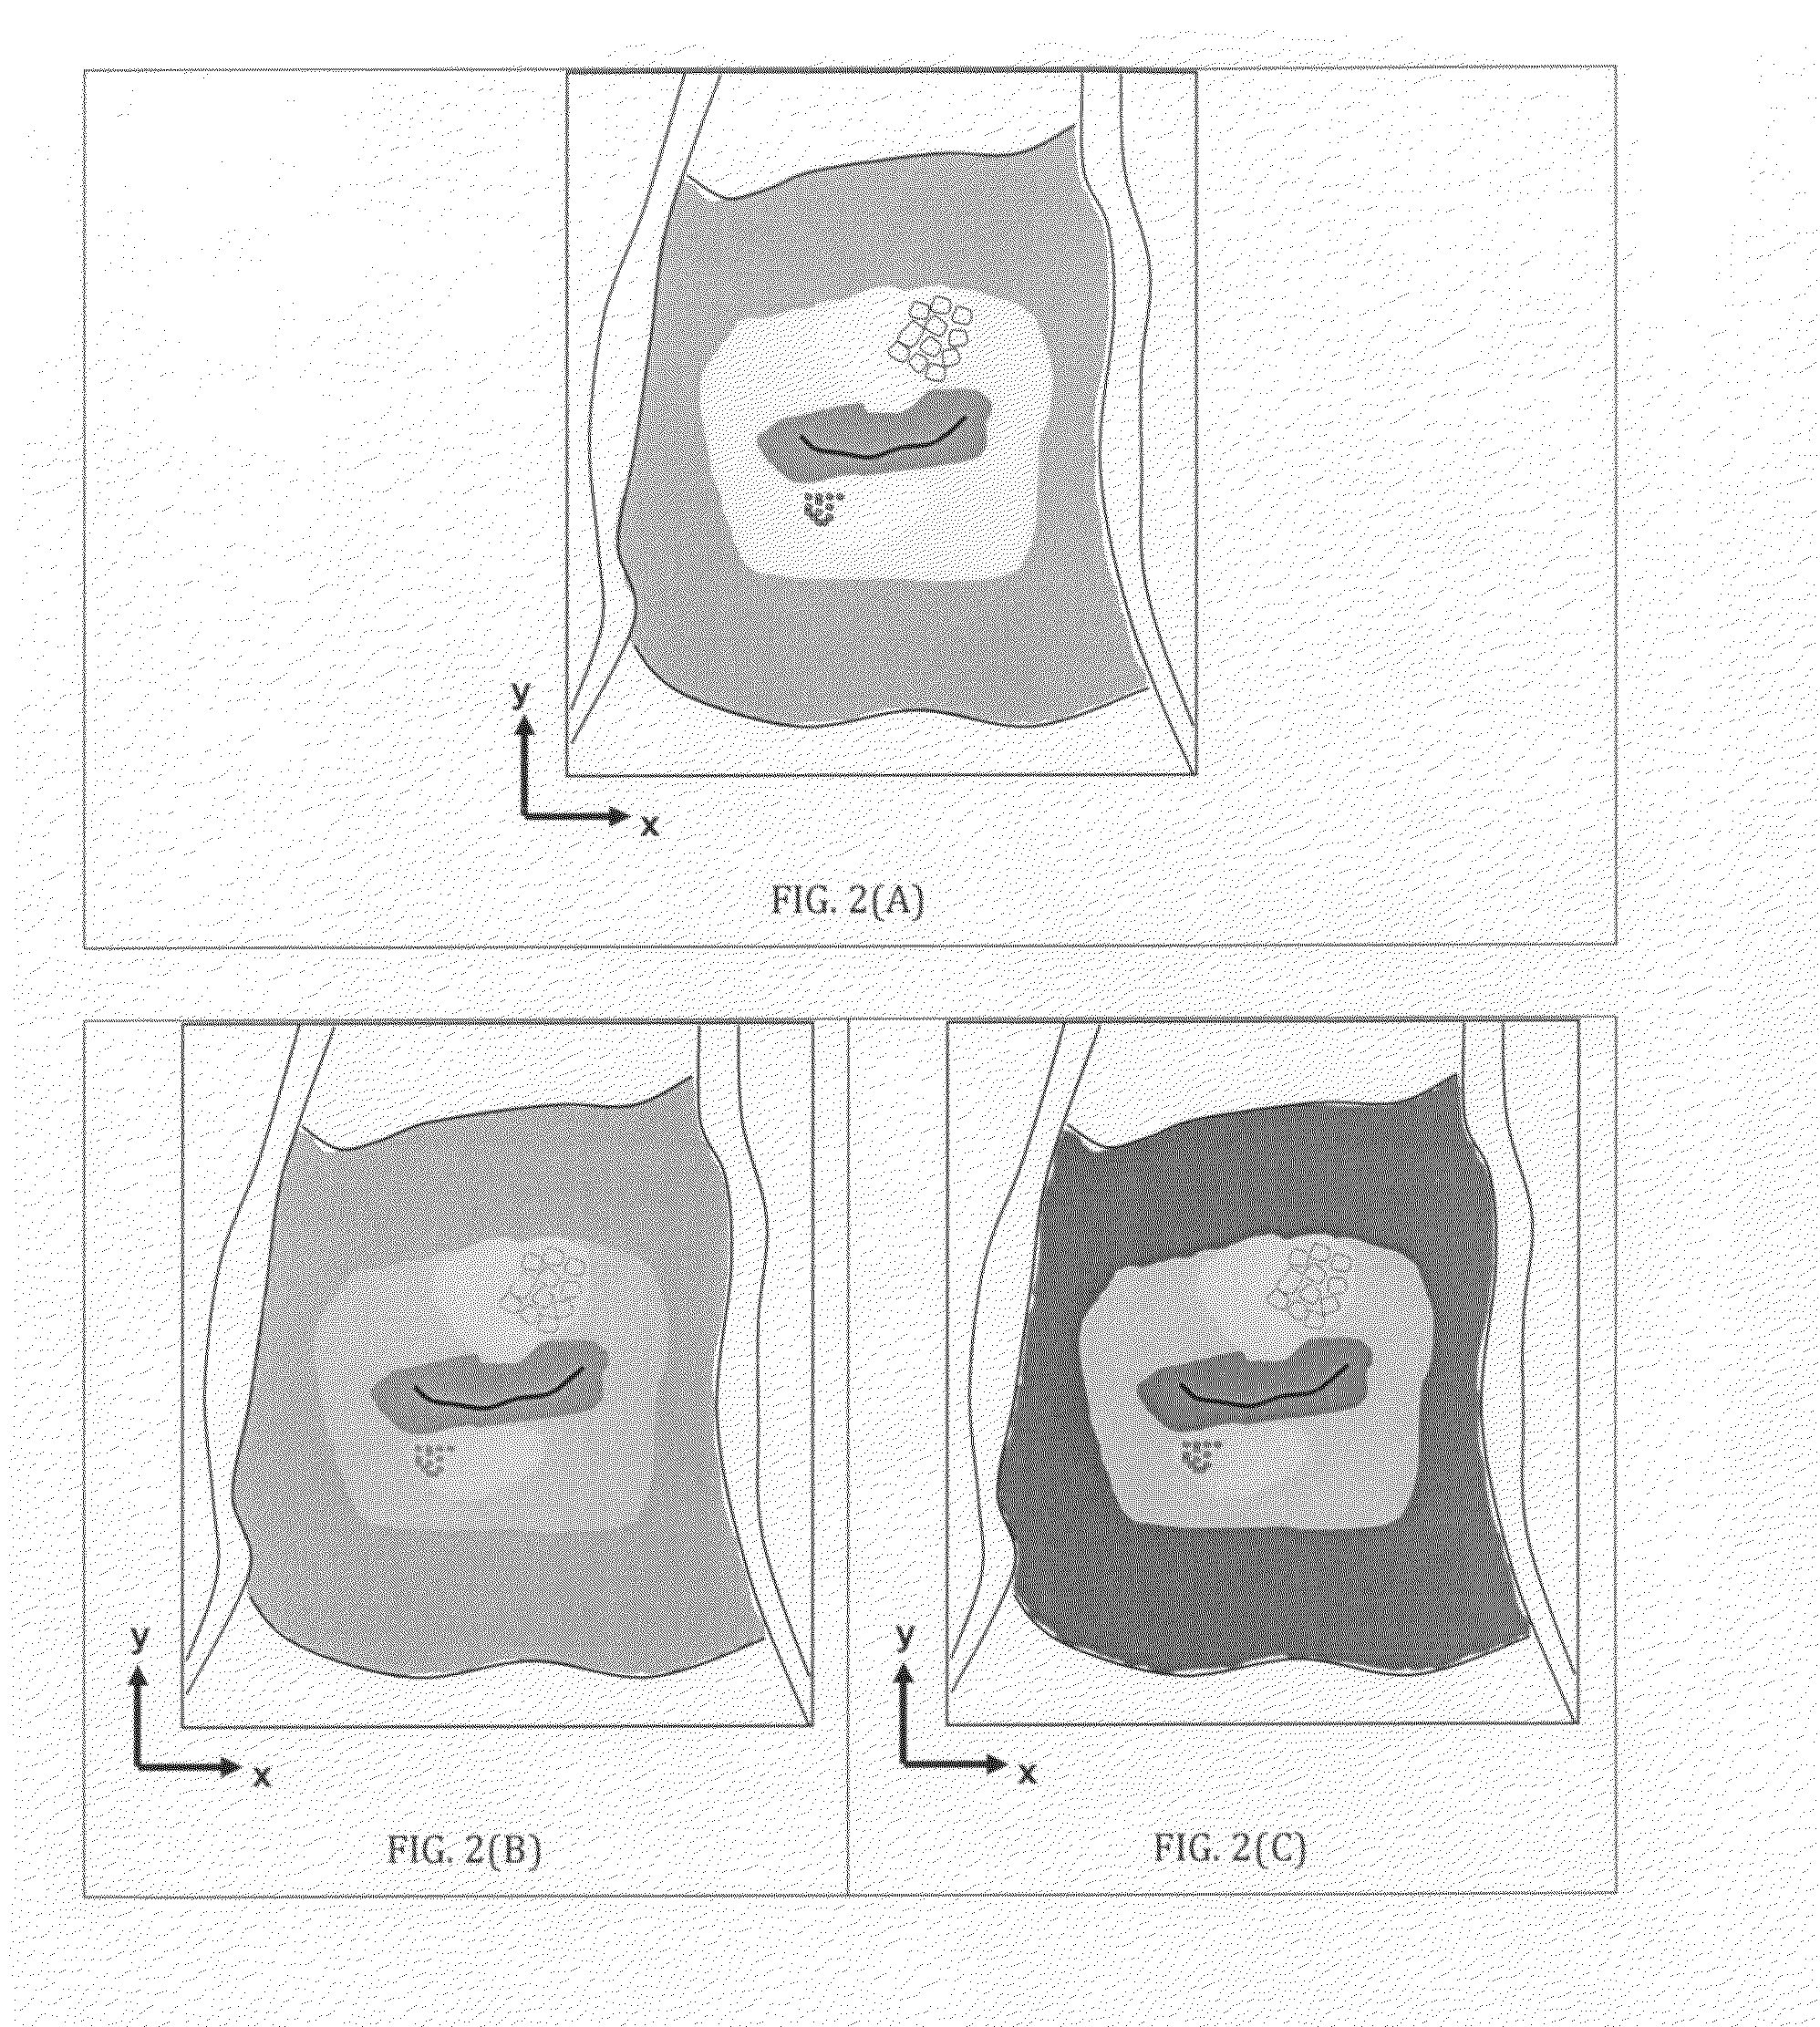 Process for preserving three dimensional orientation to allow registering histopathological diagnoses of tissue to images of that tissue